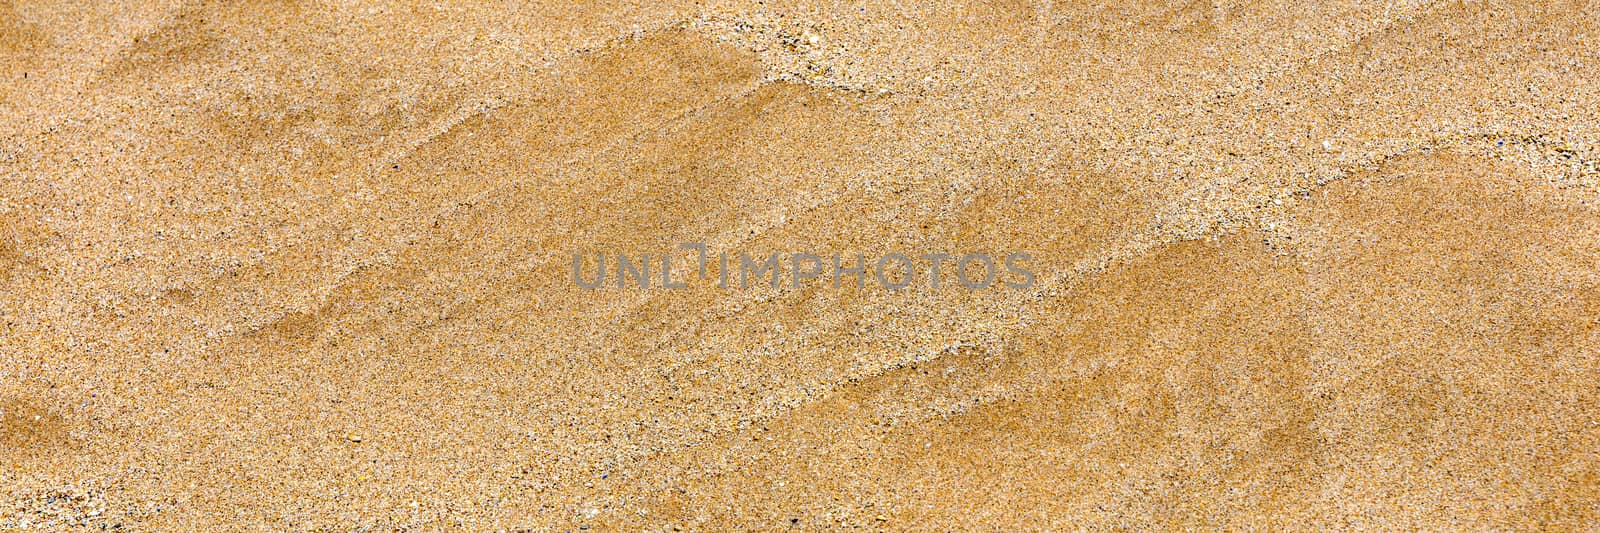 Sand surface and background. Sand Texture. Brown sand. Backgroun by DaLiu